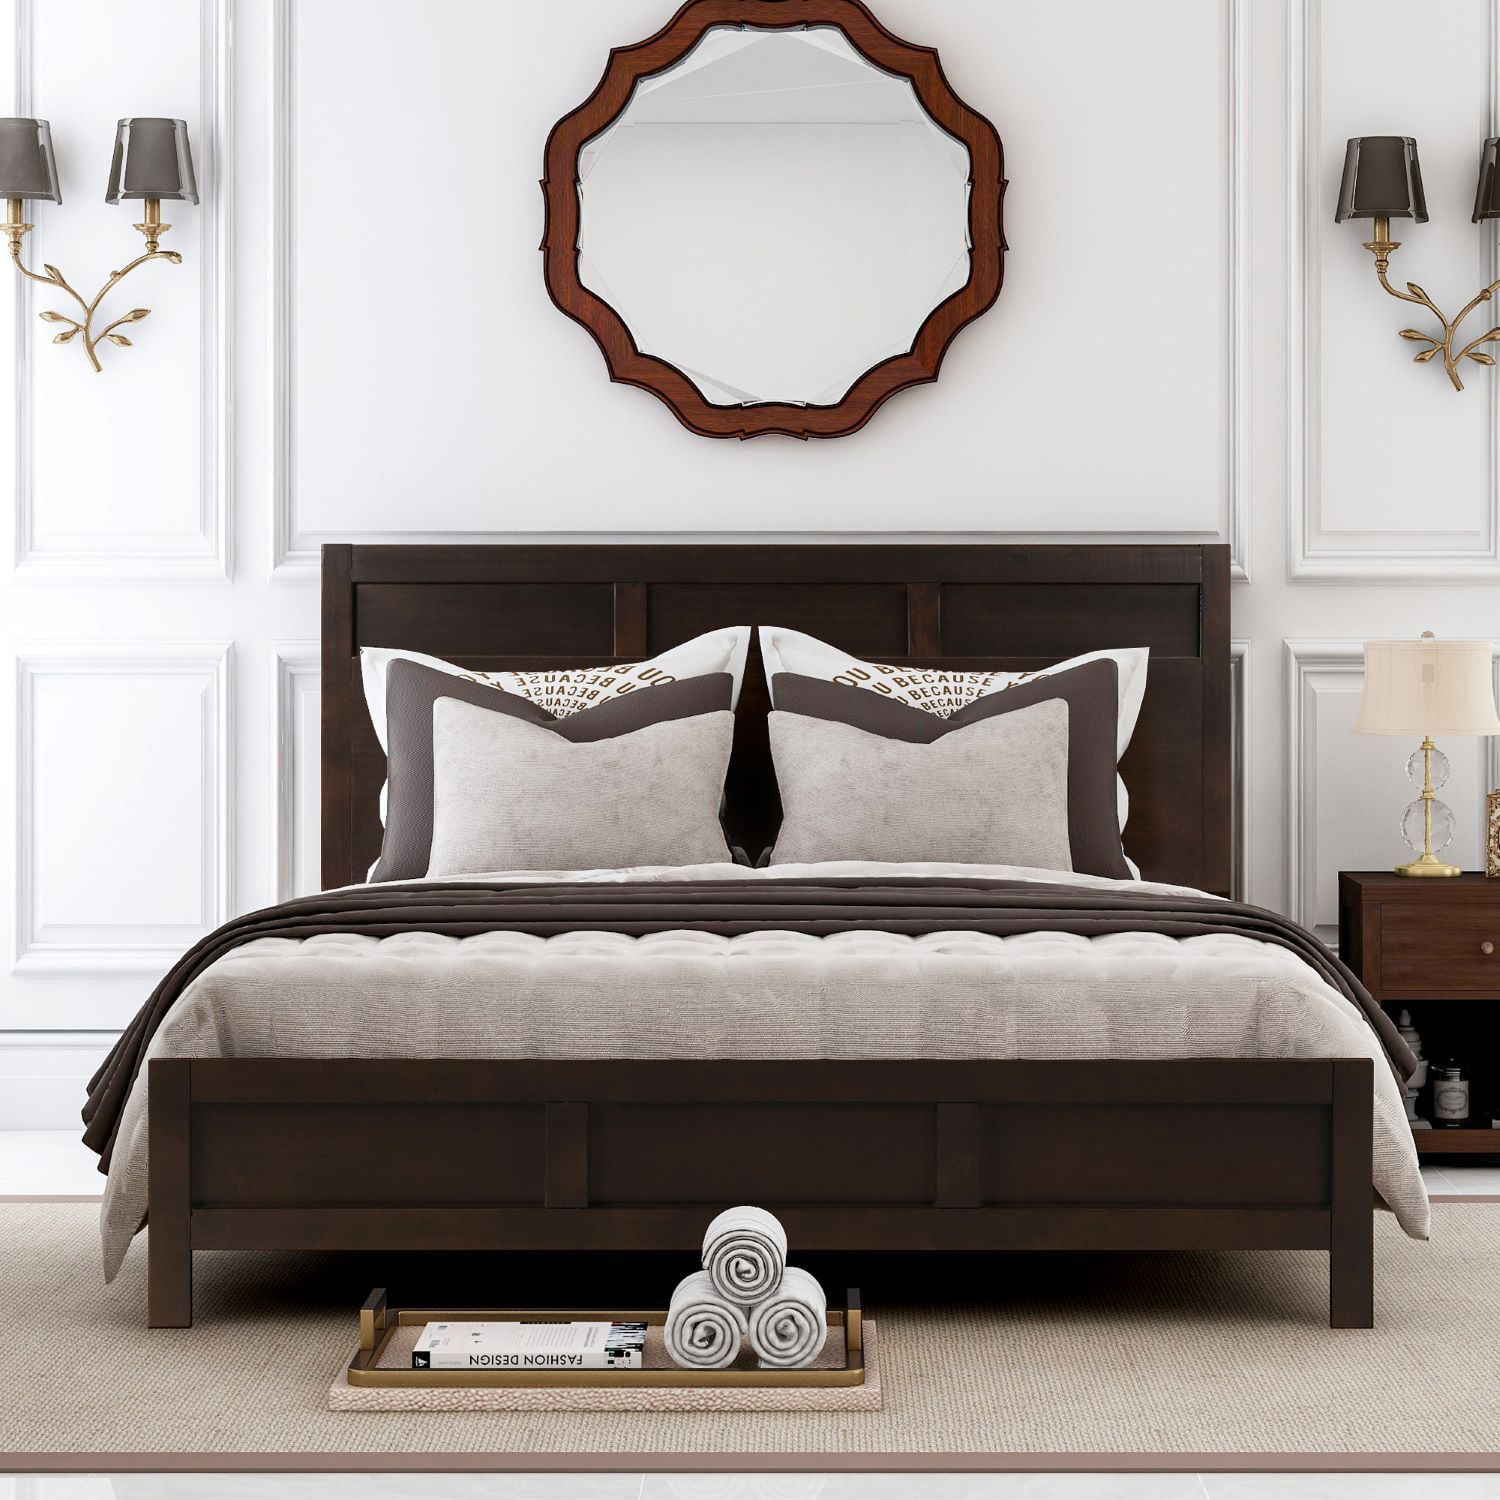 Full Sleigh Bed Frame Wood Headboard Contemporary Furniture Classic Bedroom Beds 